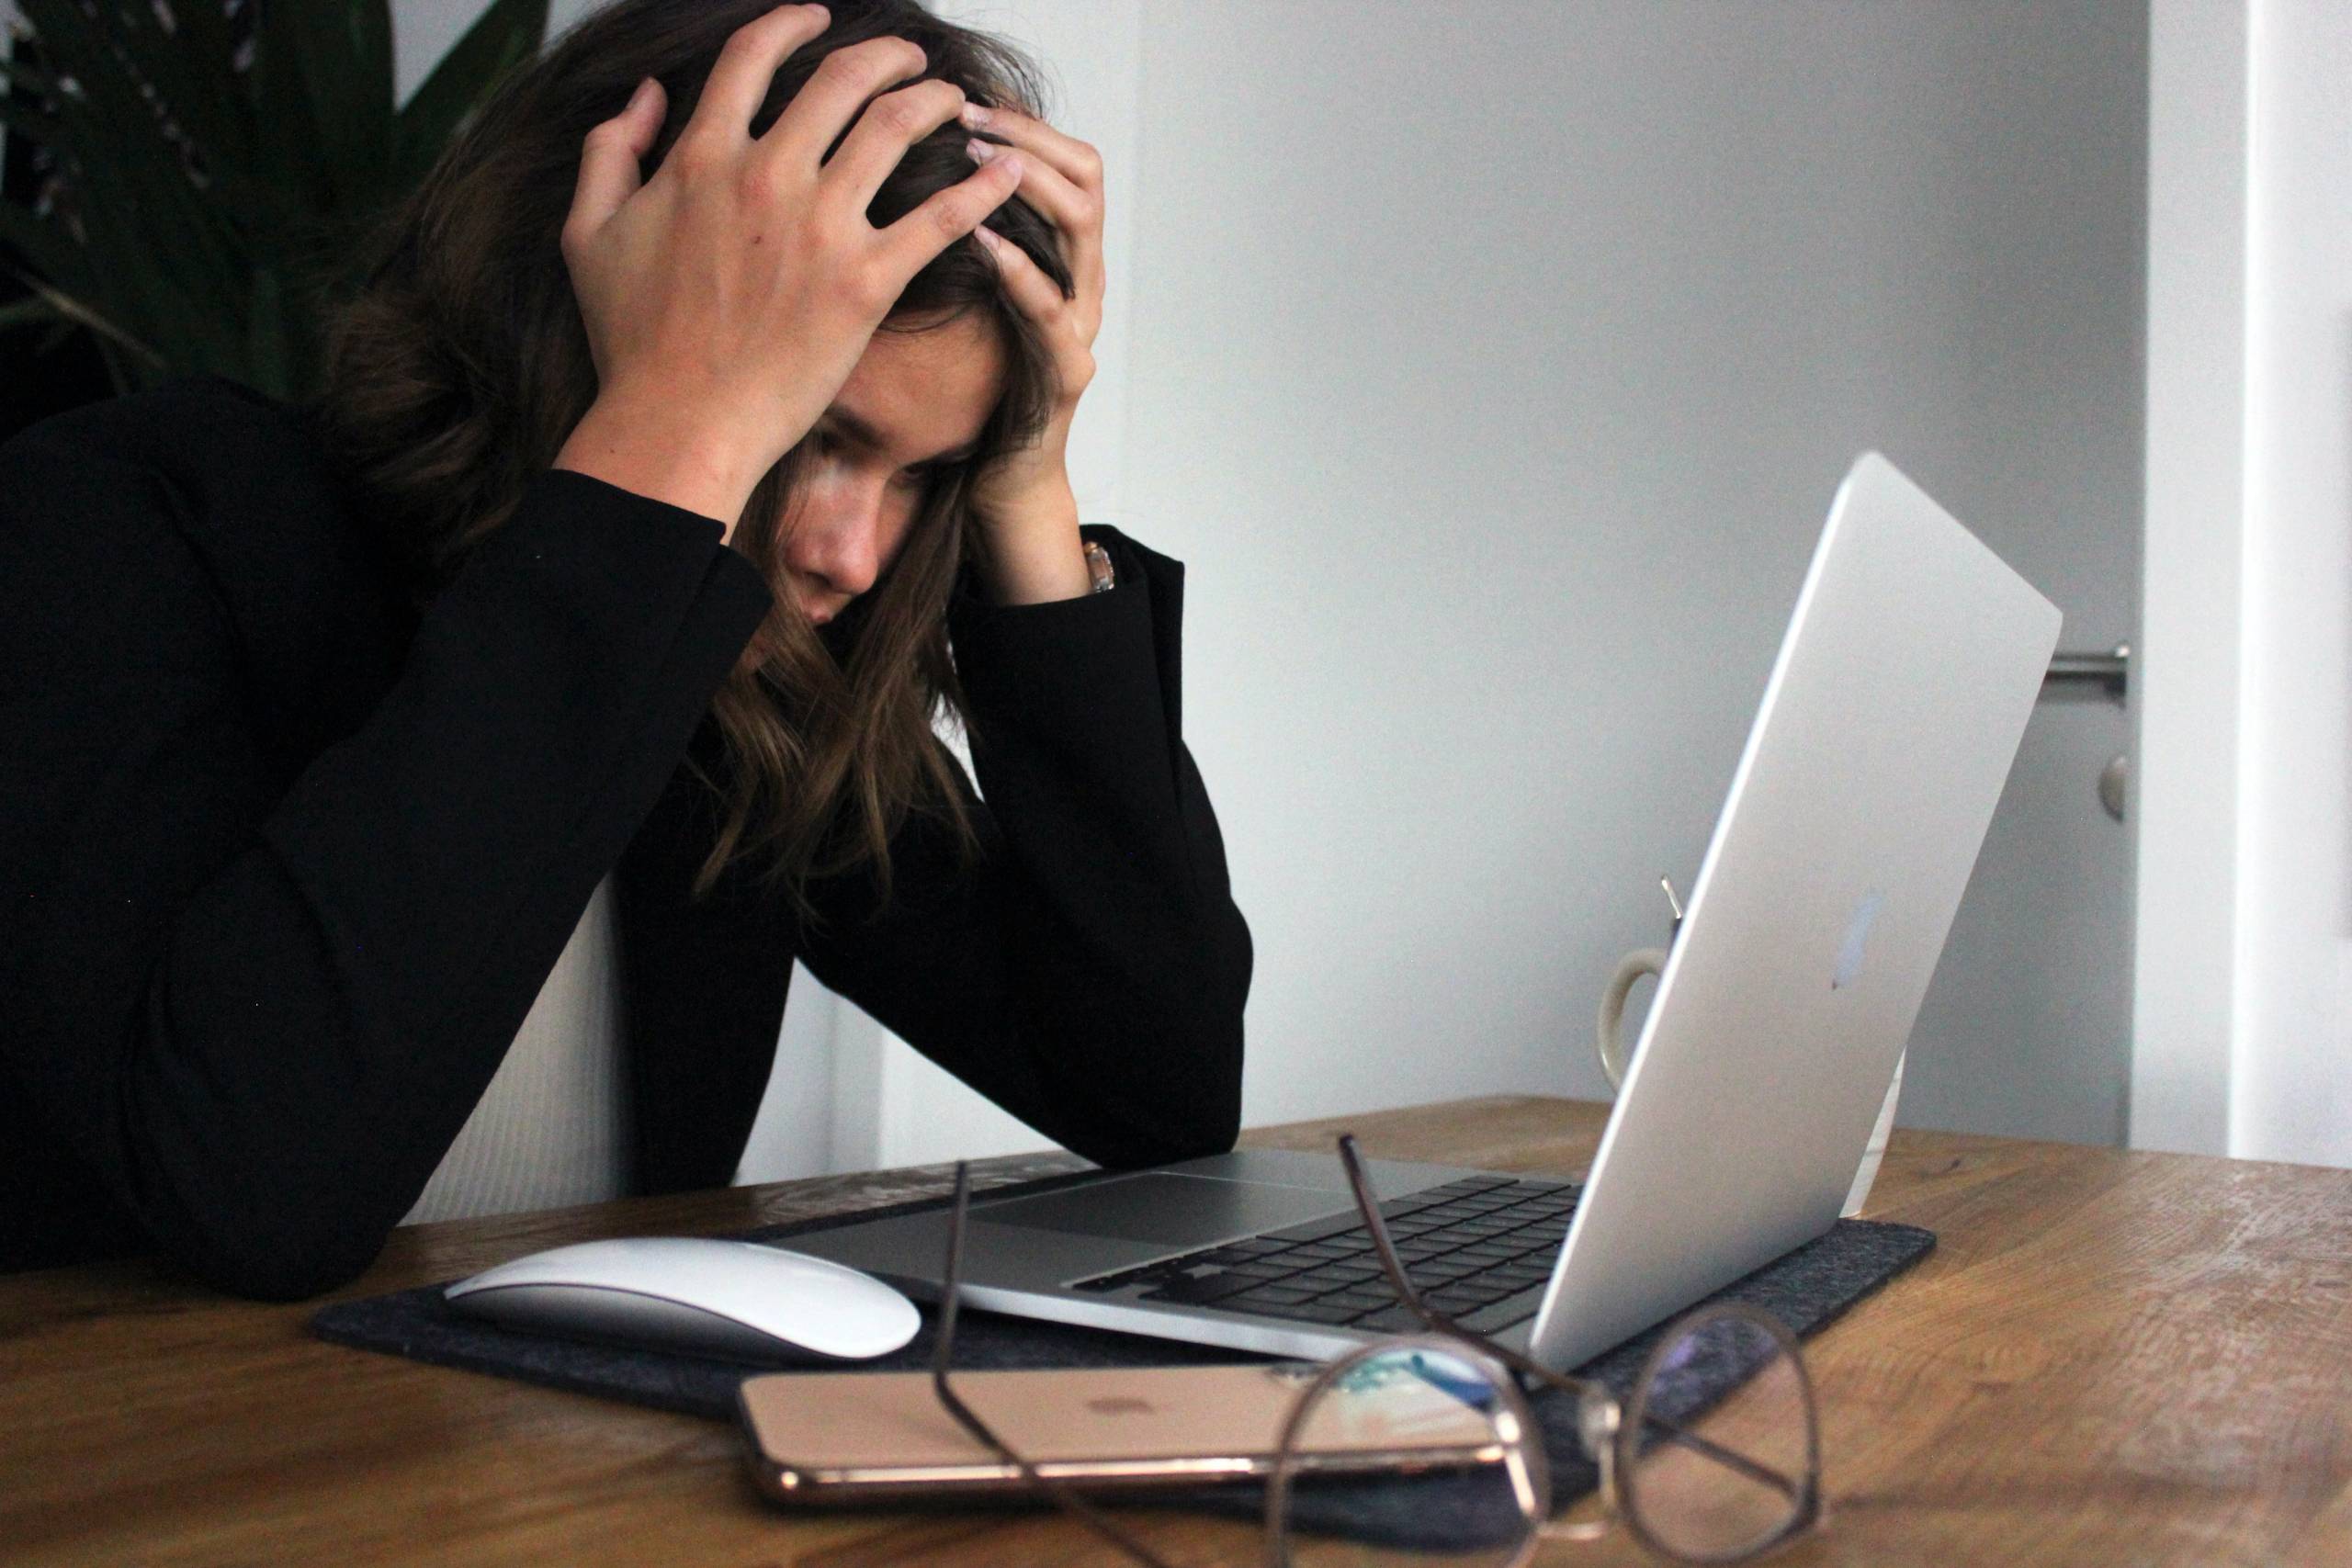 woman-at-desk-in-front-of-laptop-appears-stressed-holds-head-in-hands